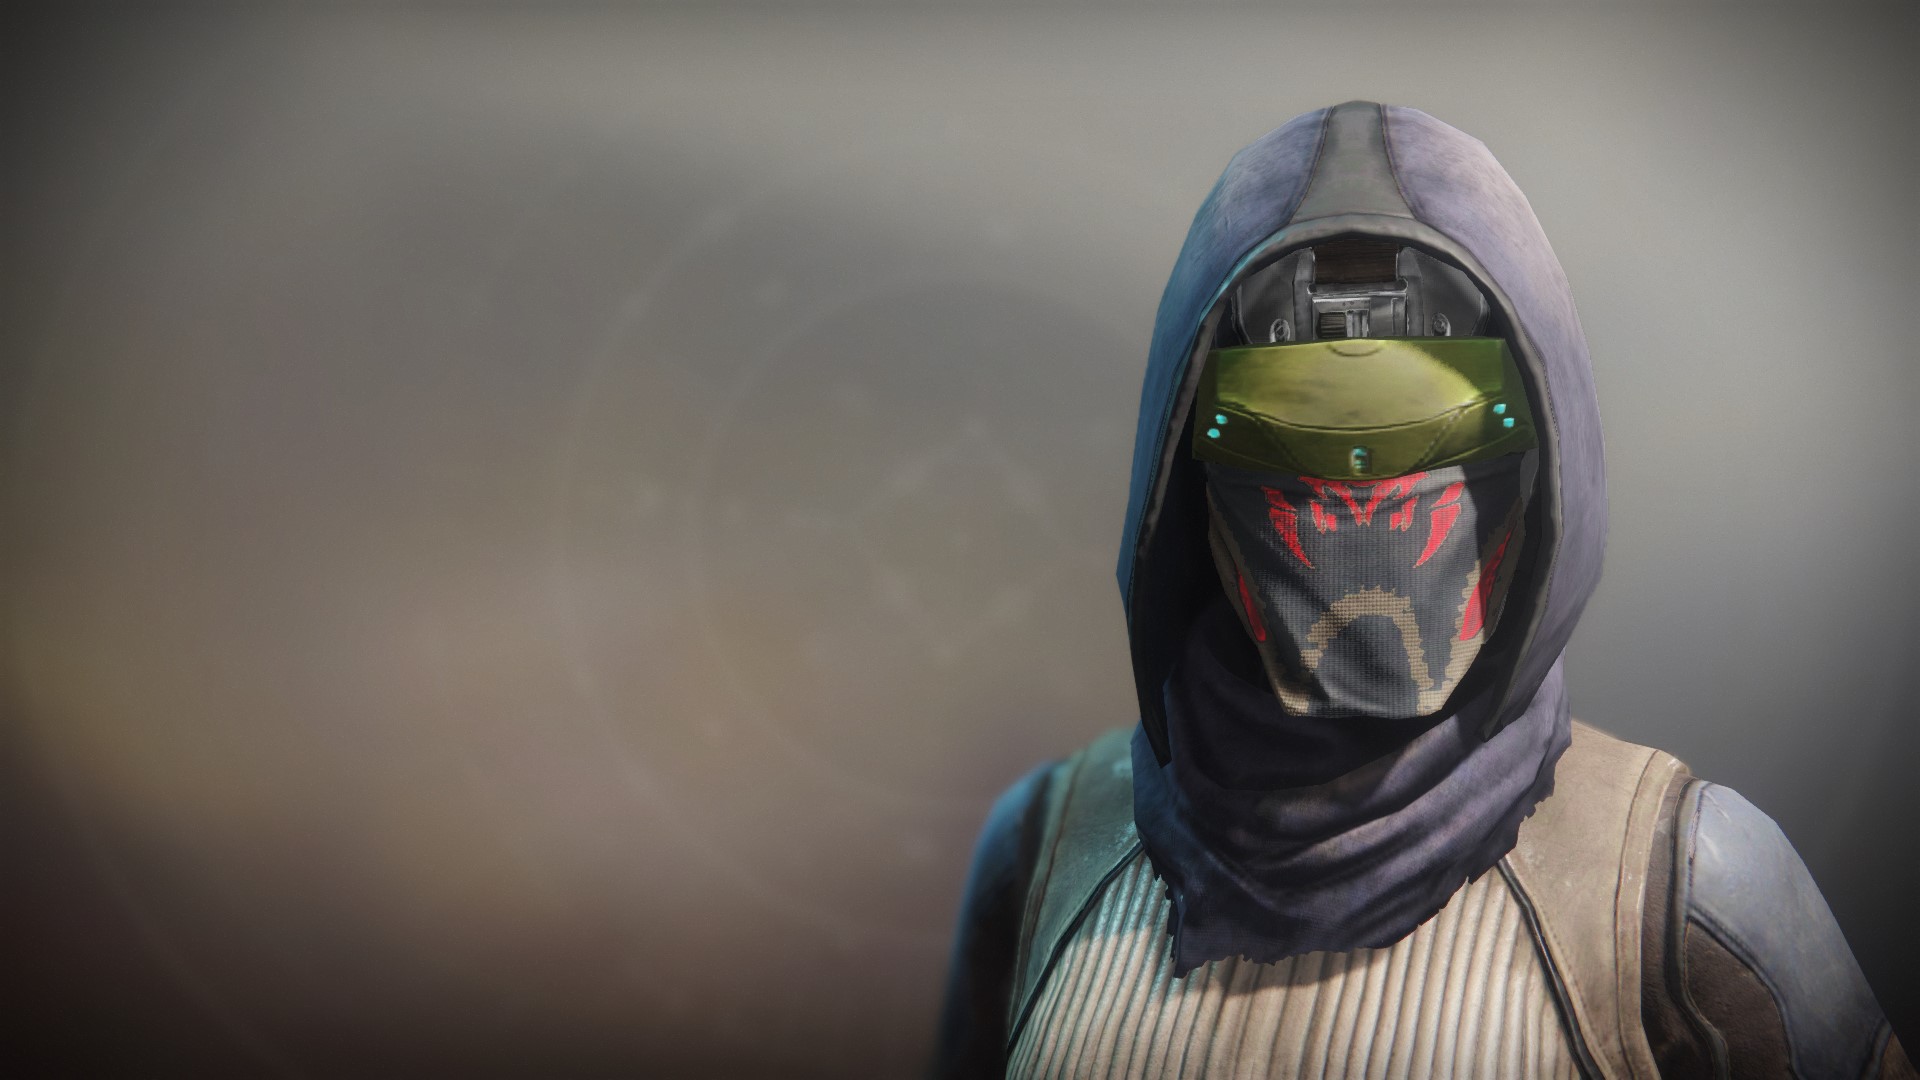 An in-game render of the Notorious Invader Mask.